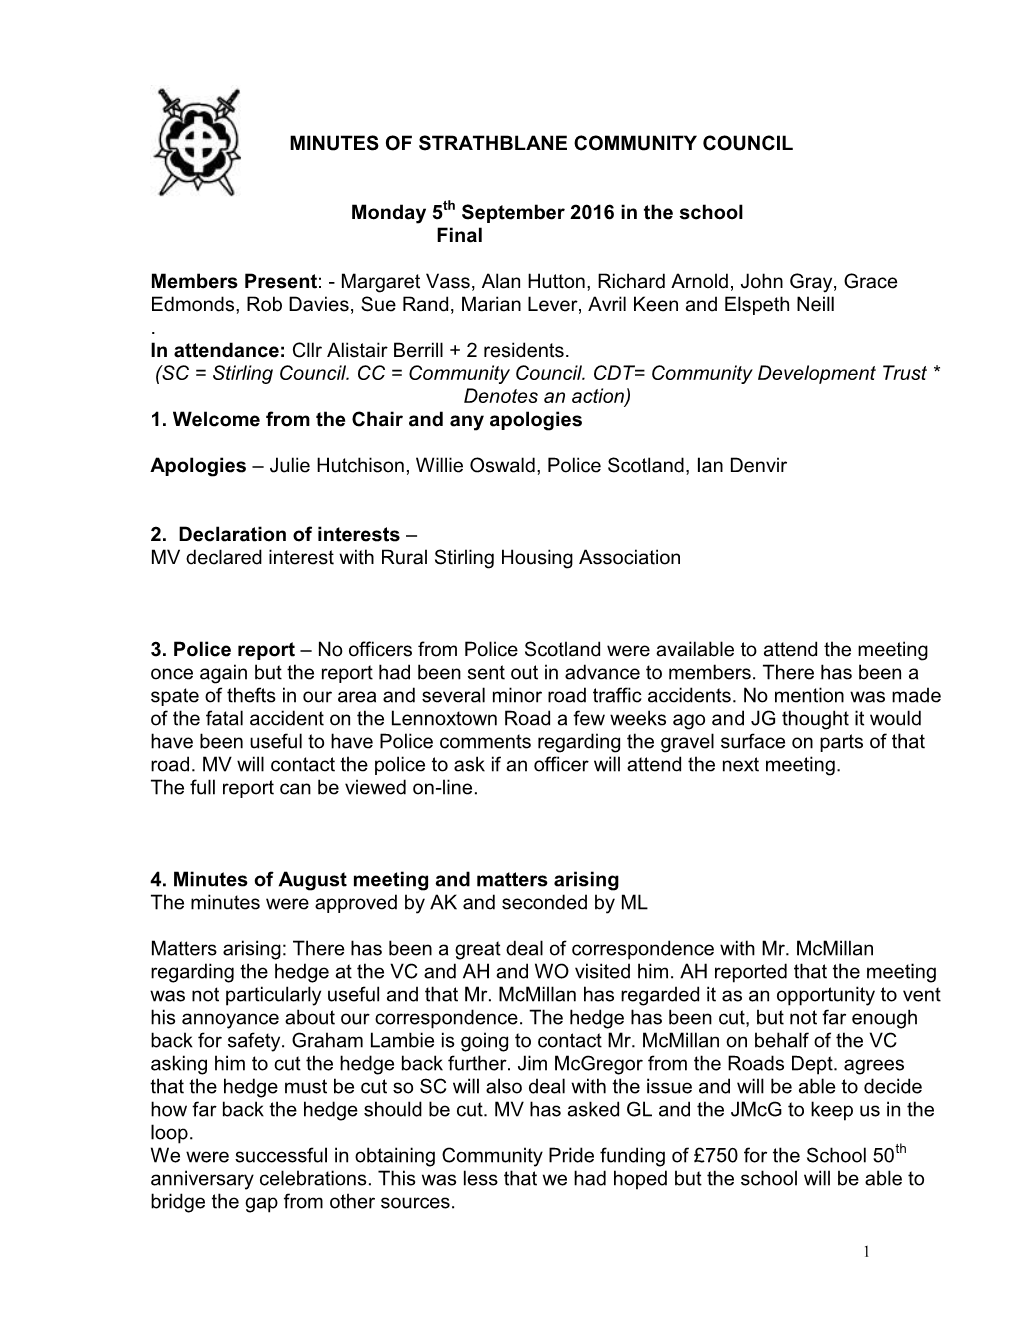 Minutes of Strathblane Community Council